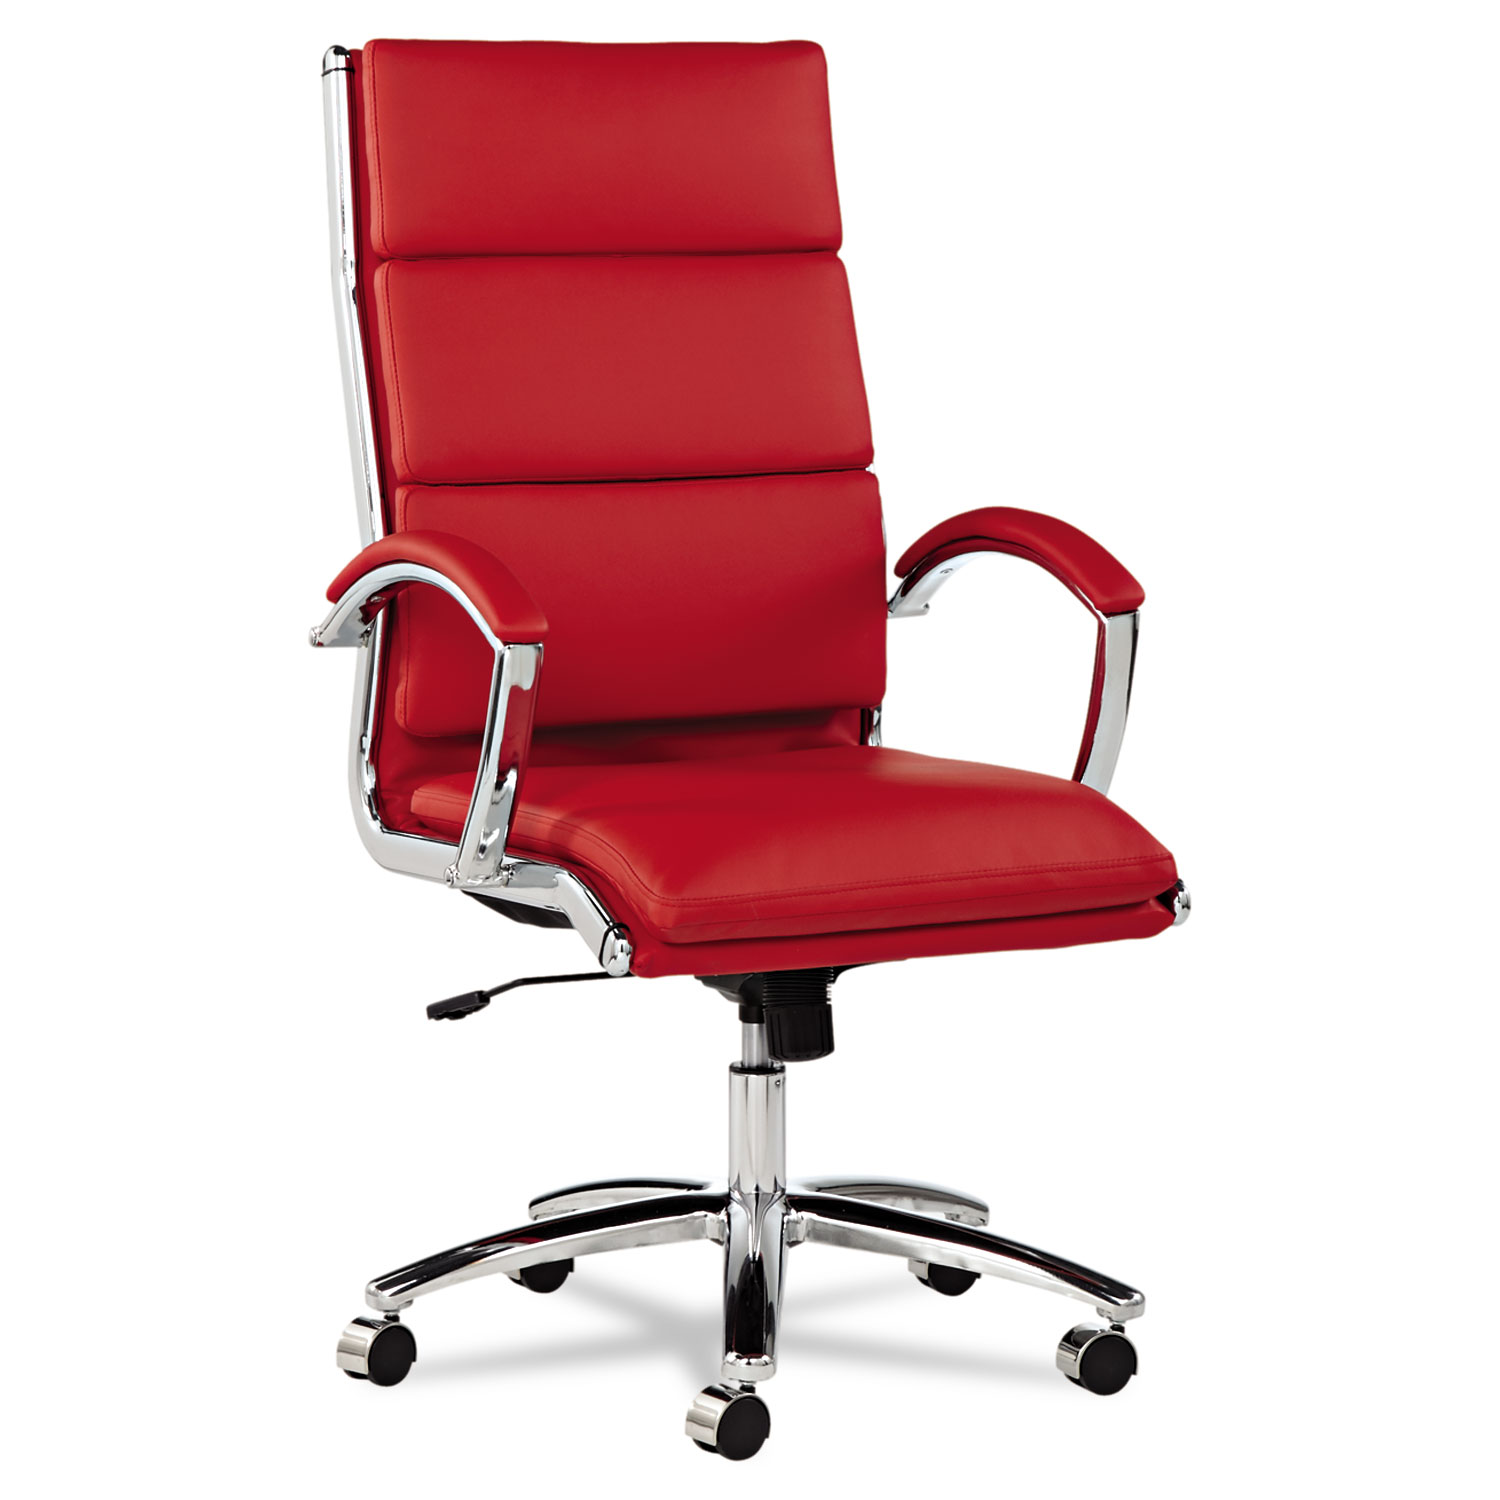  Alera ALENR4139 Alera Neratoli High-Back Slim Profile Chair, Supports up to 275 lbs., Red Seat/Red Back, Chrome Base (ALENR4139) 